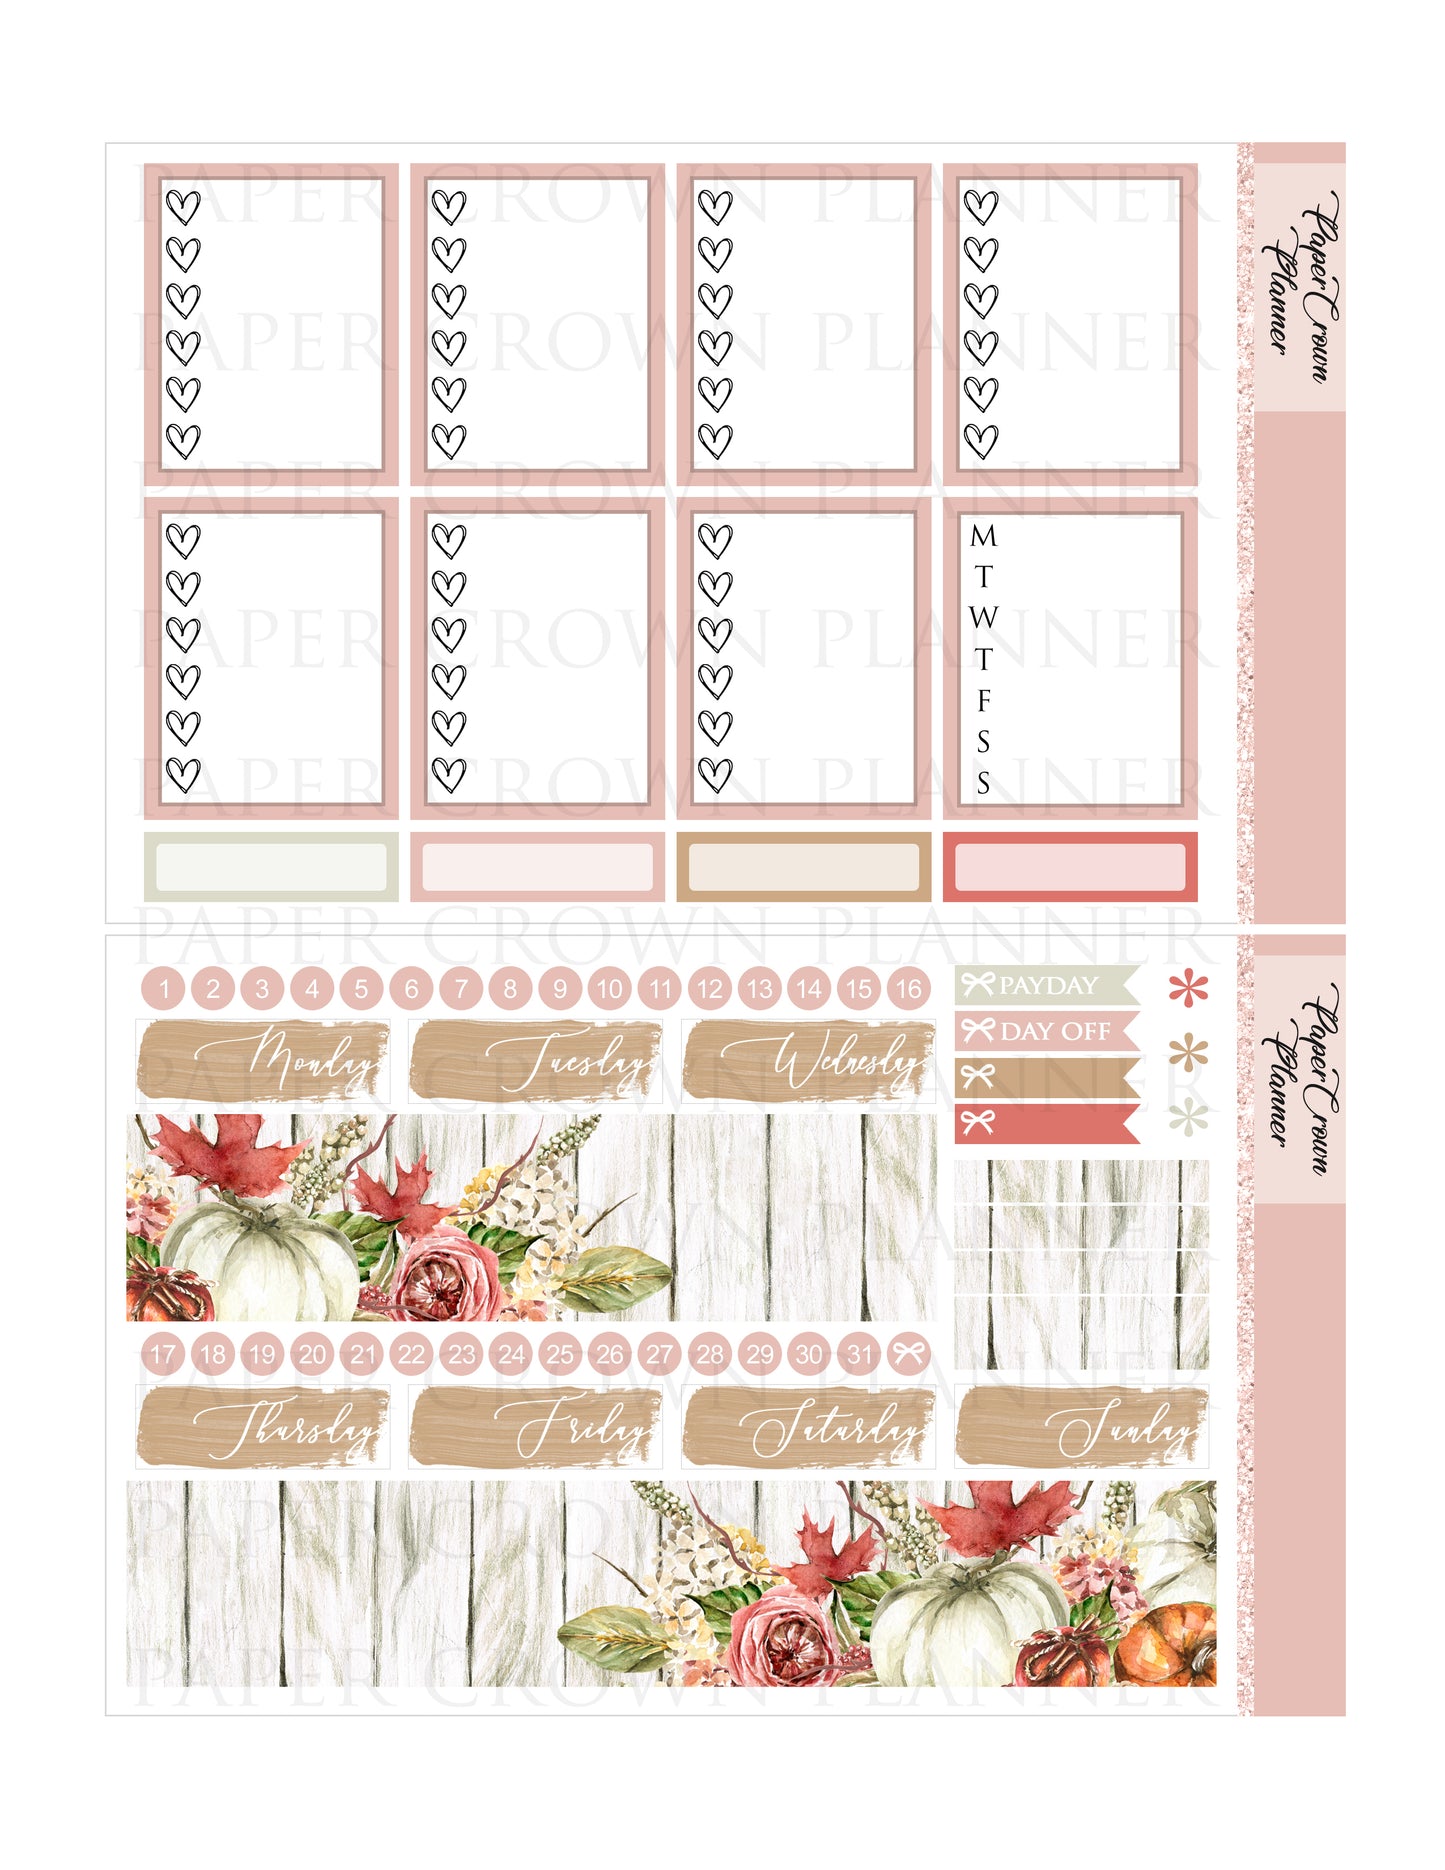 AUTUMN MOOD // Weekly Planner Stickers